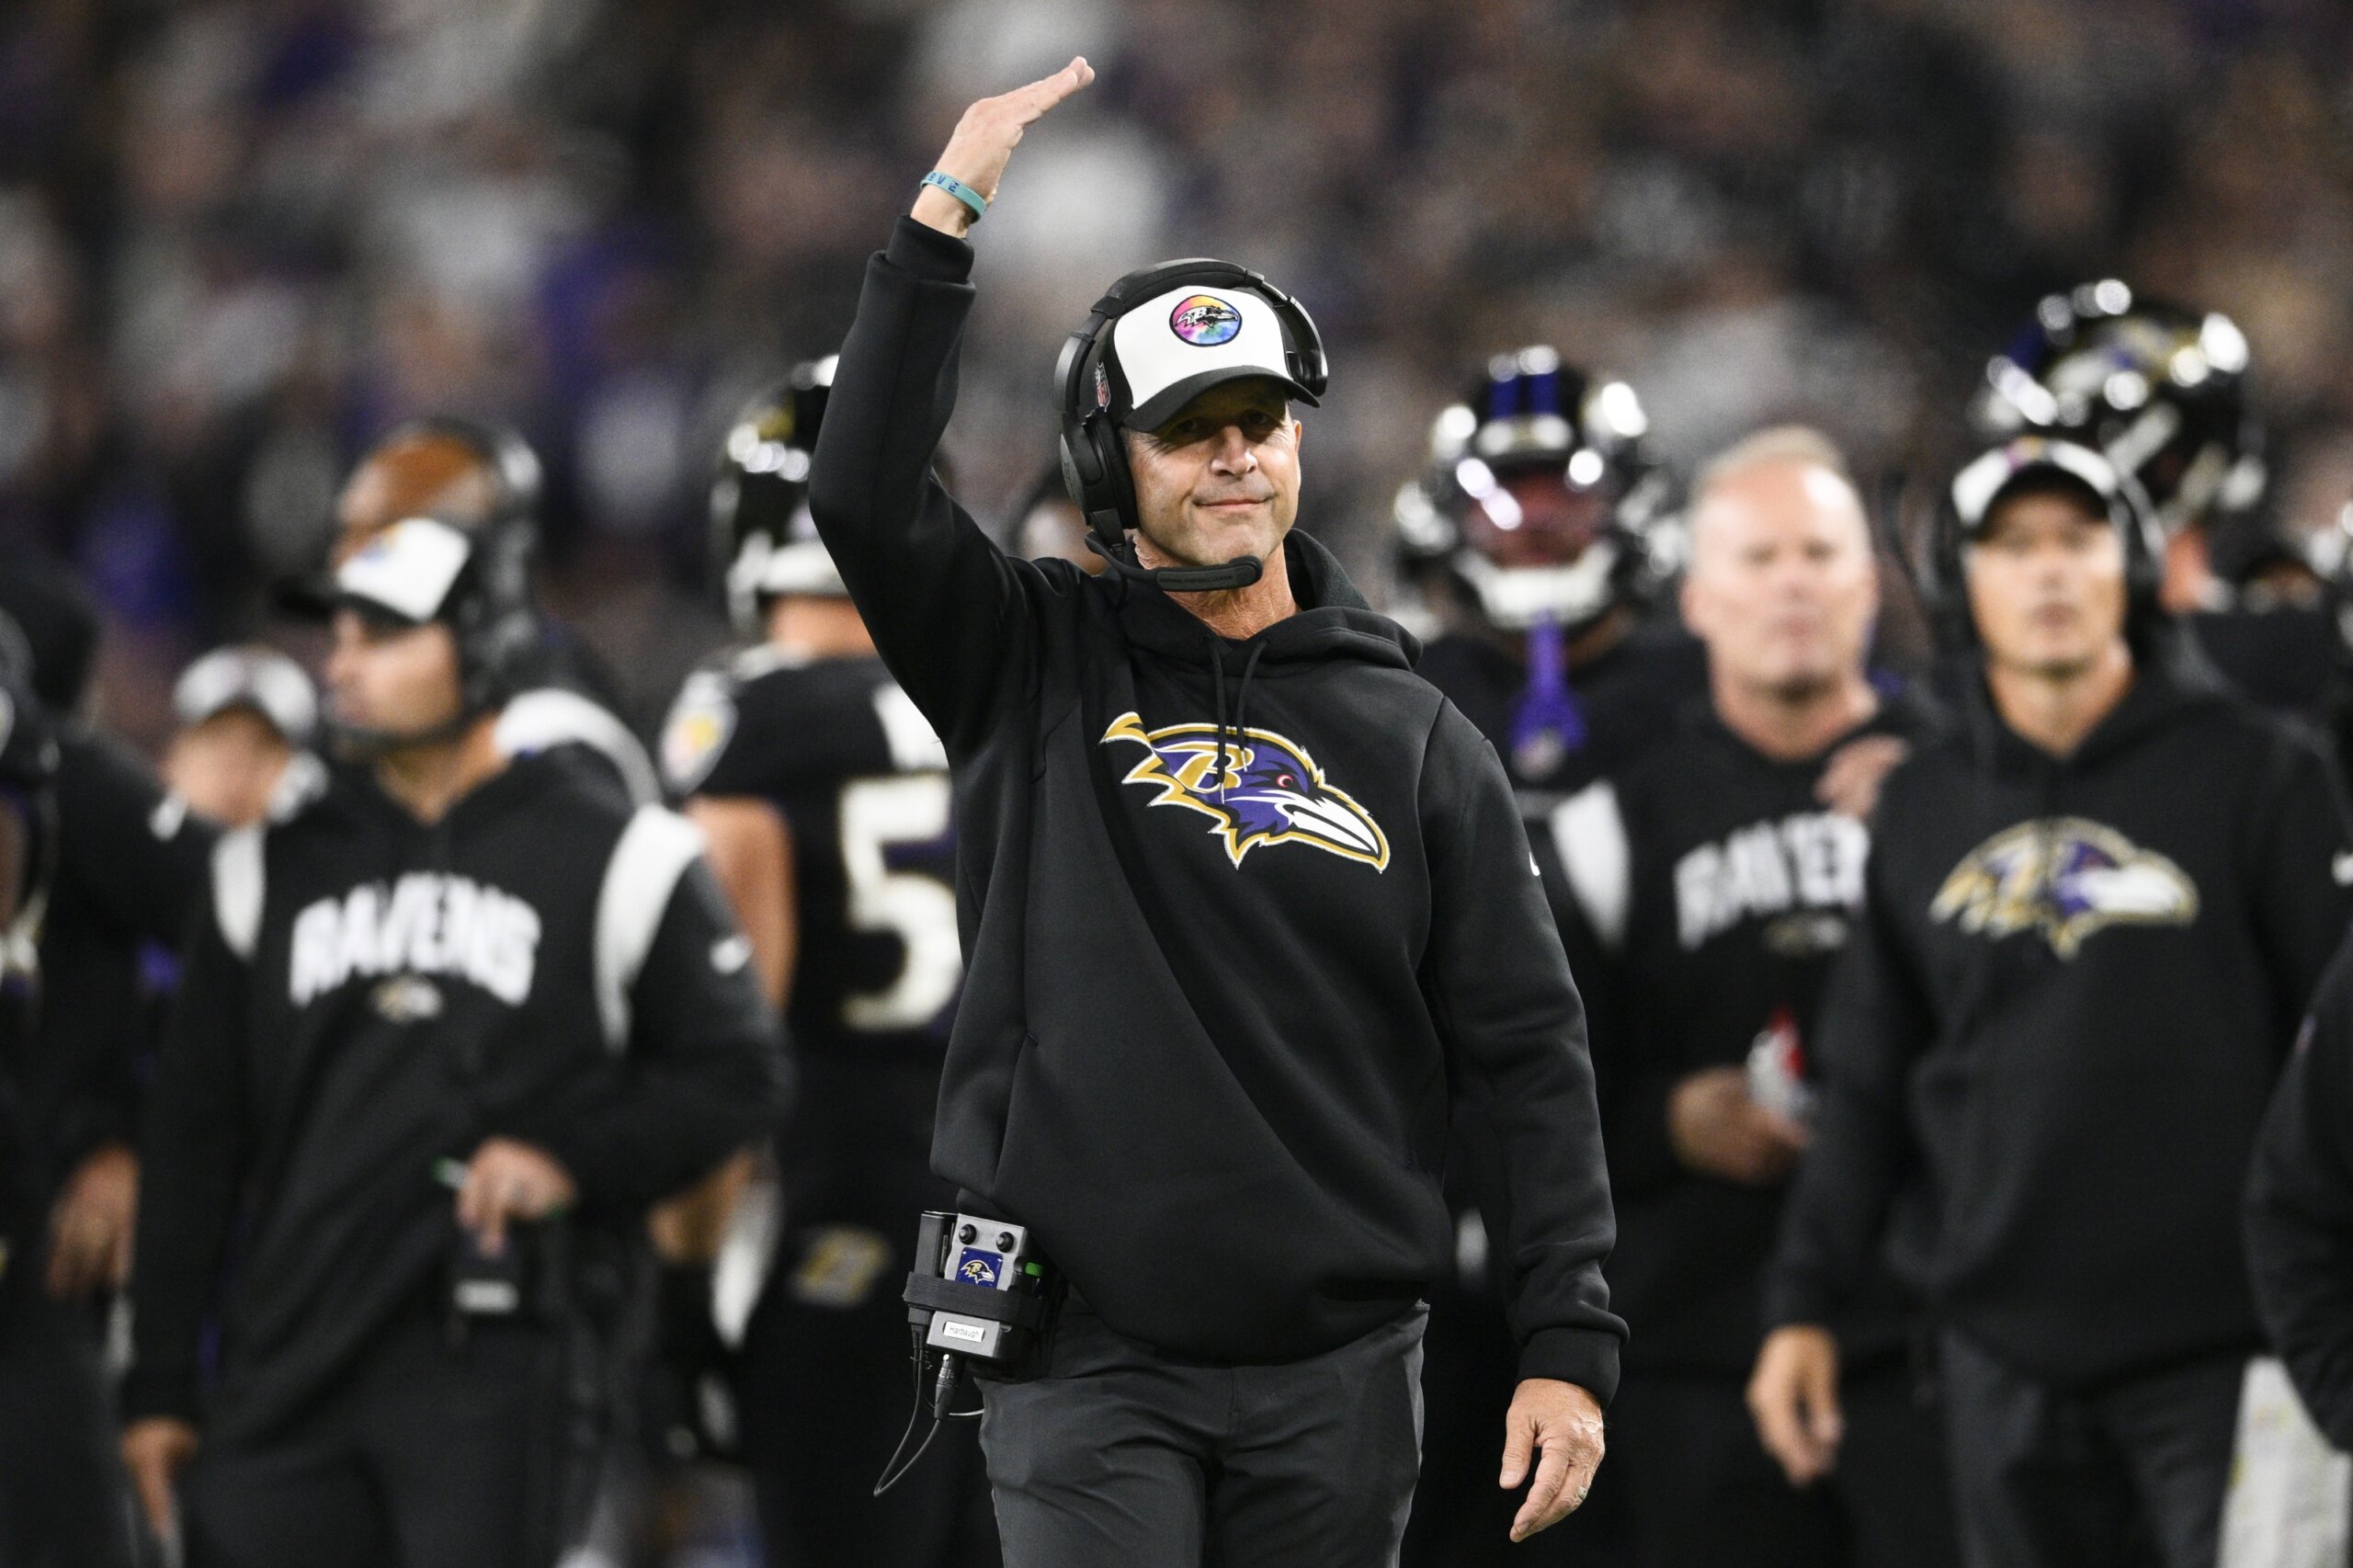 Ravens rest starters, focus on playoff rematch with Bengals